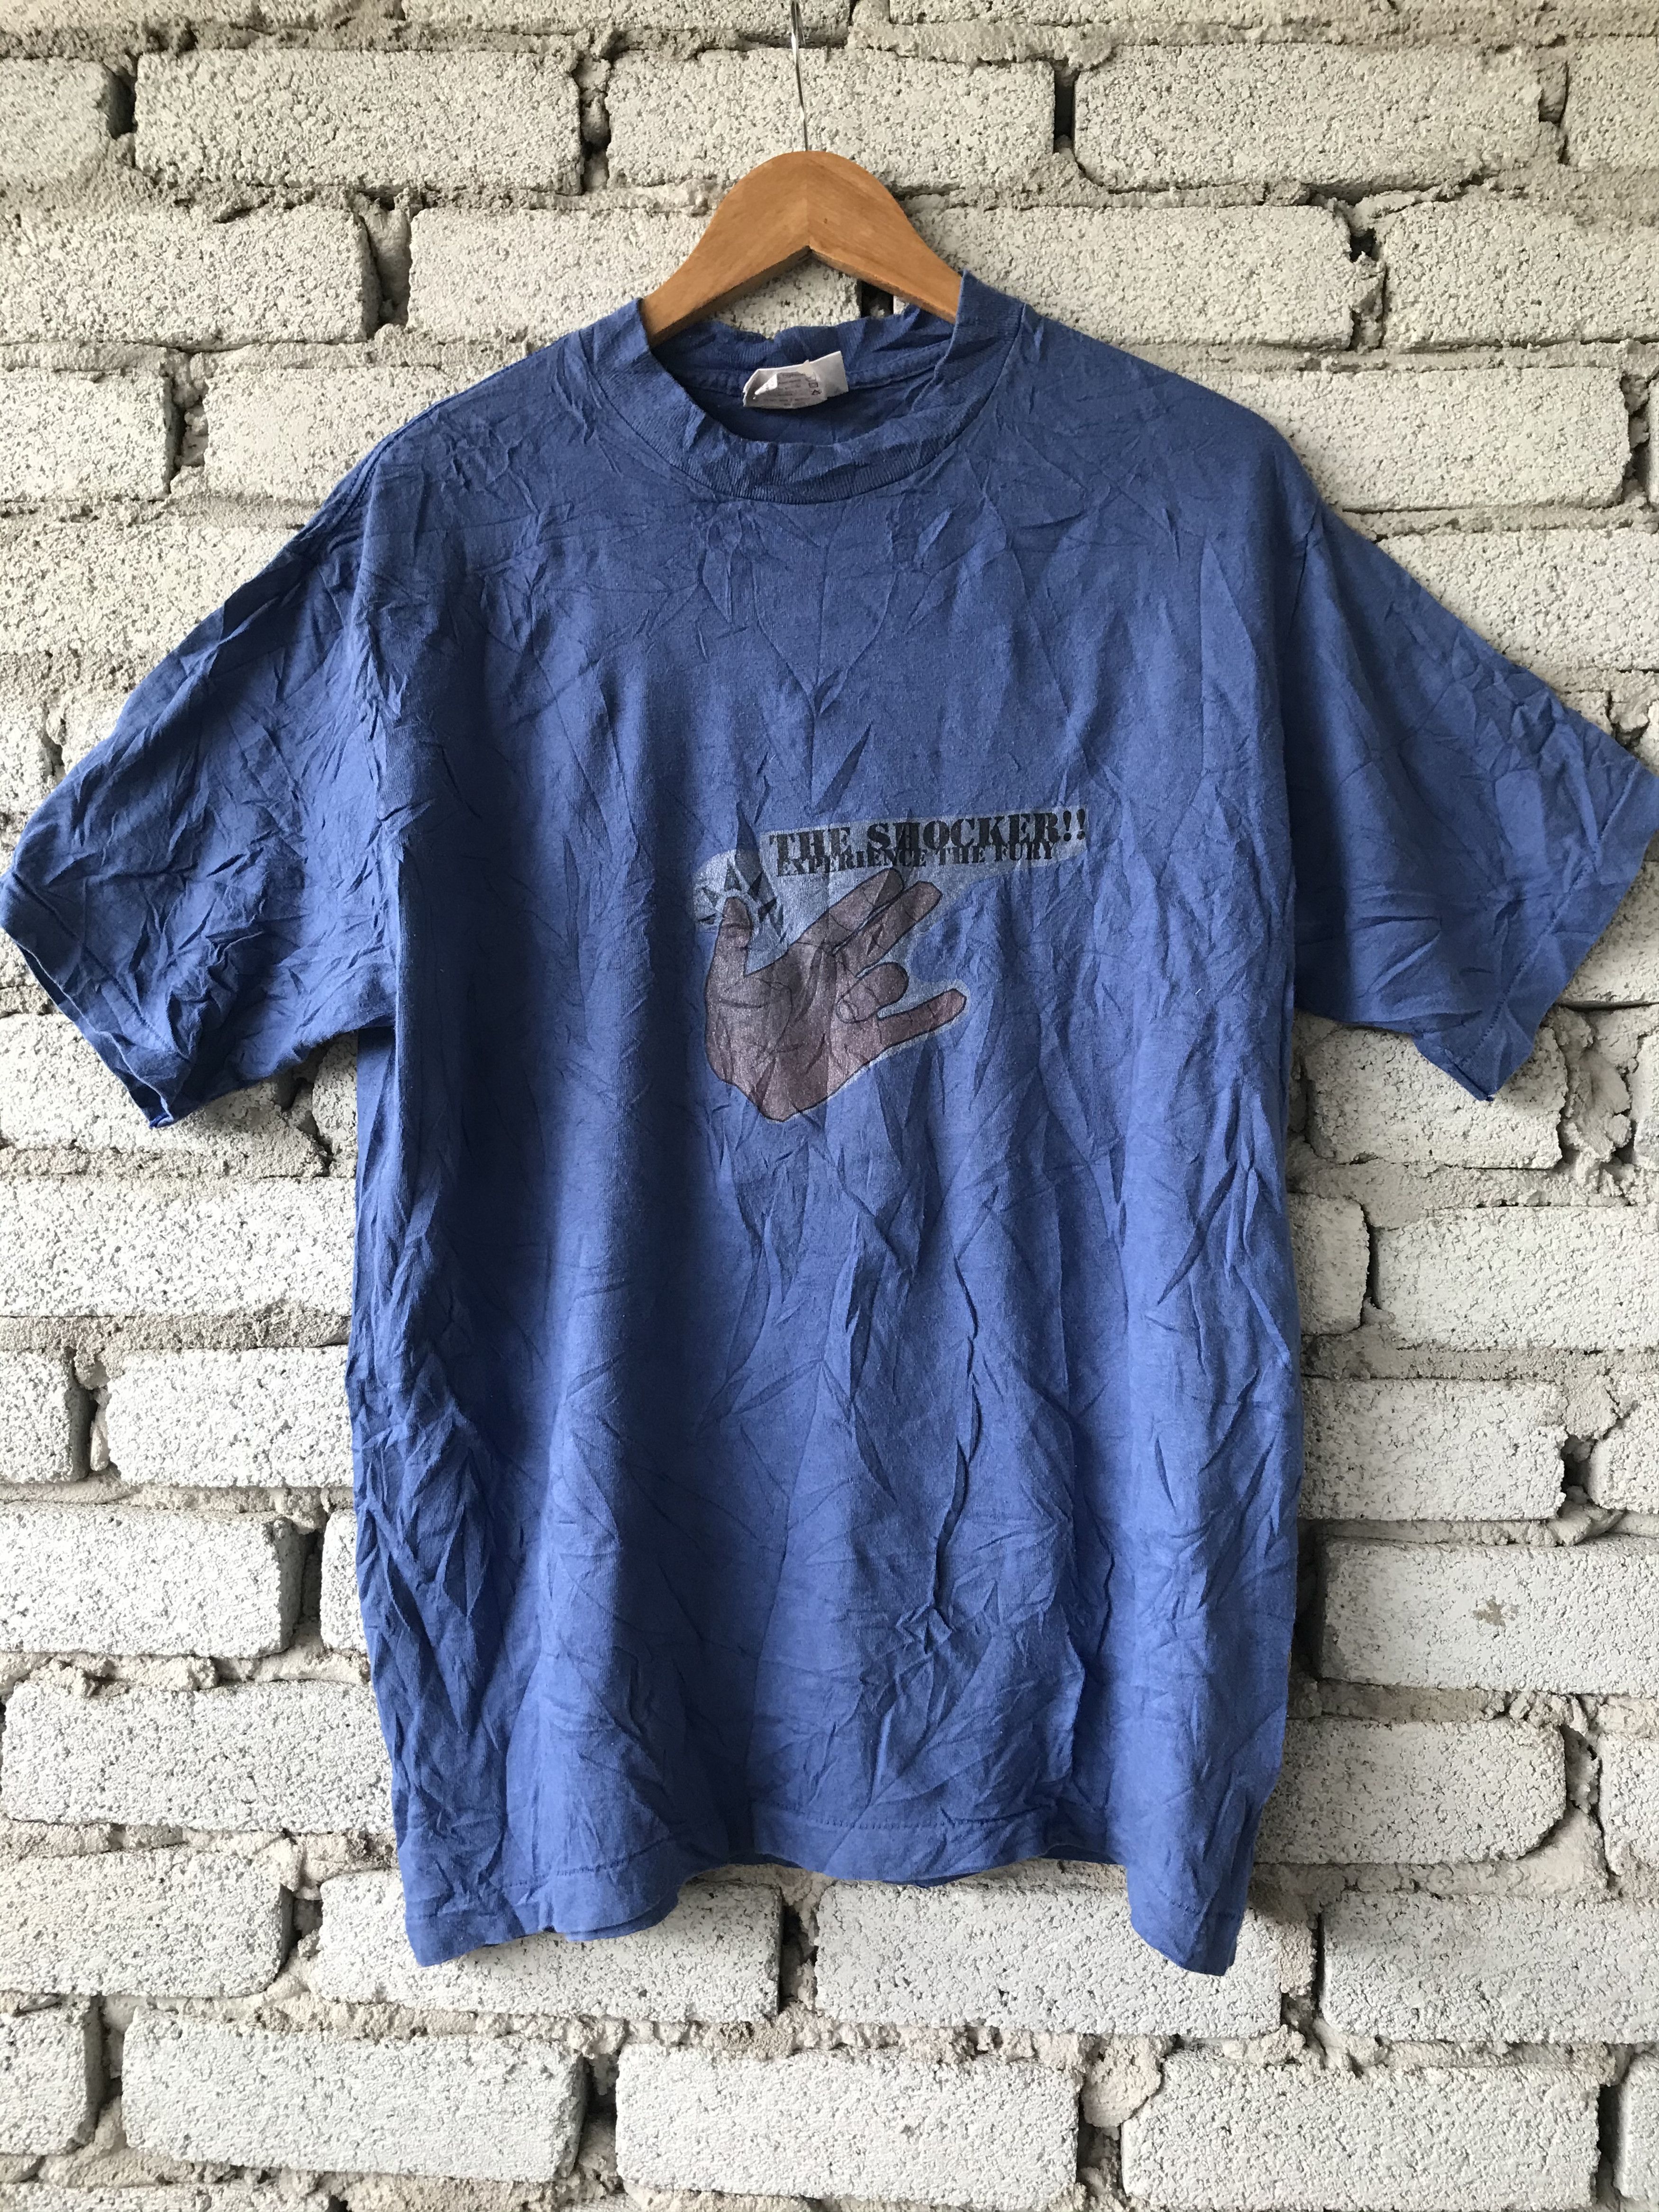 Vintage Vintage Single Stitch The Shocker Experience The Fury | Grailed